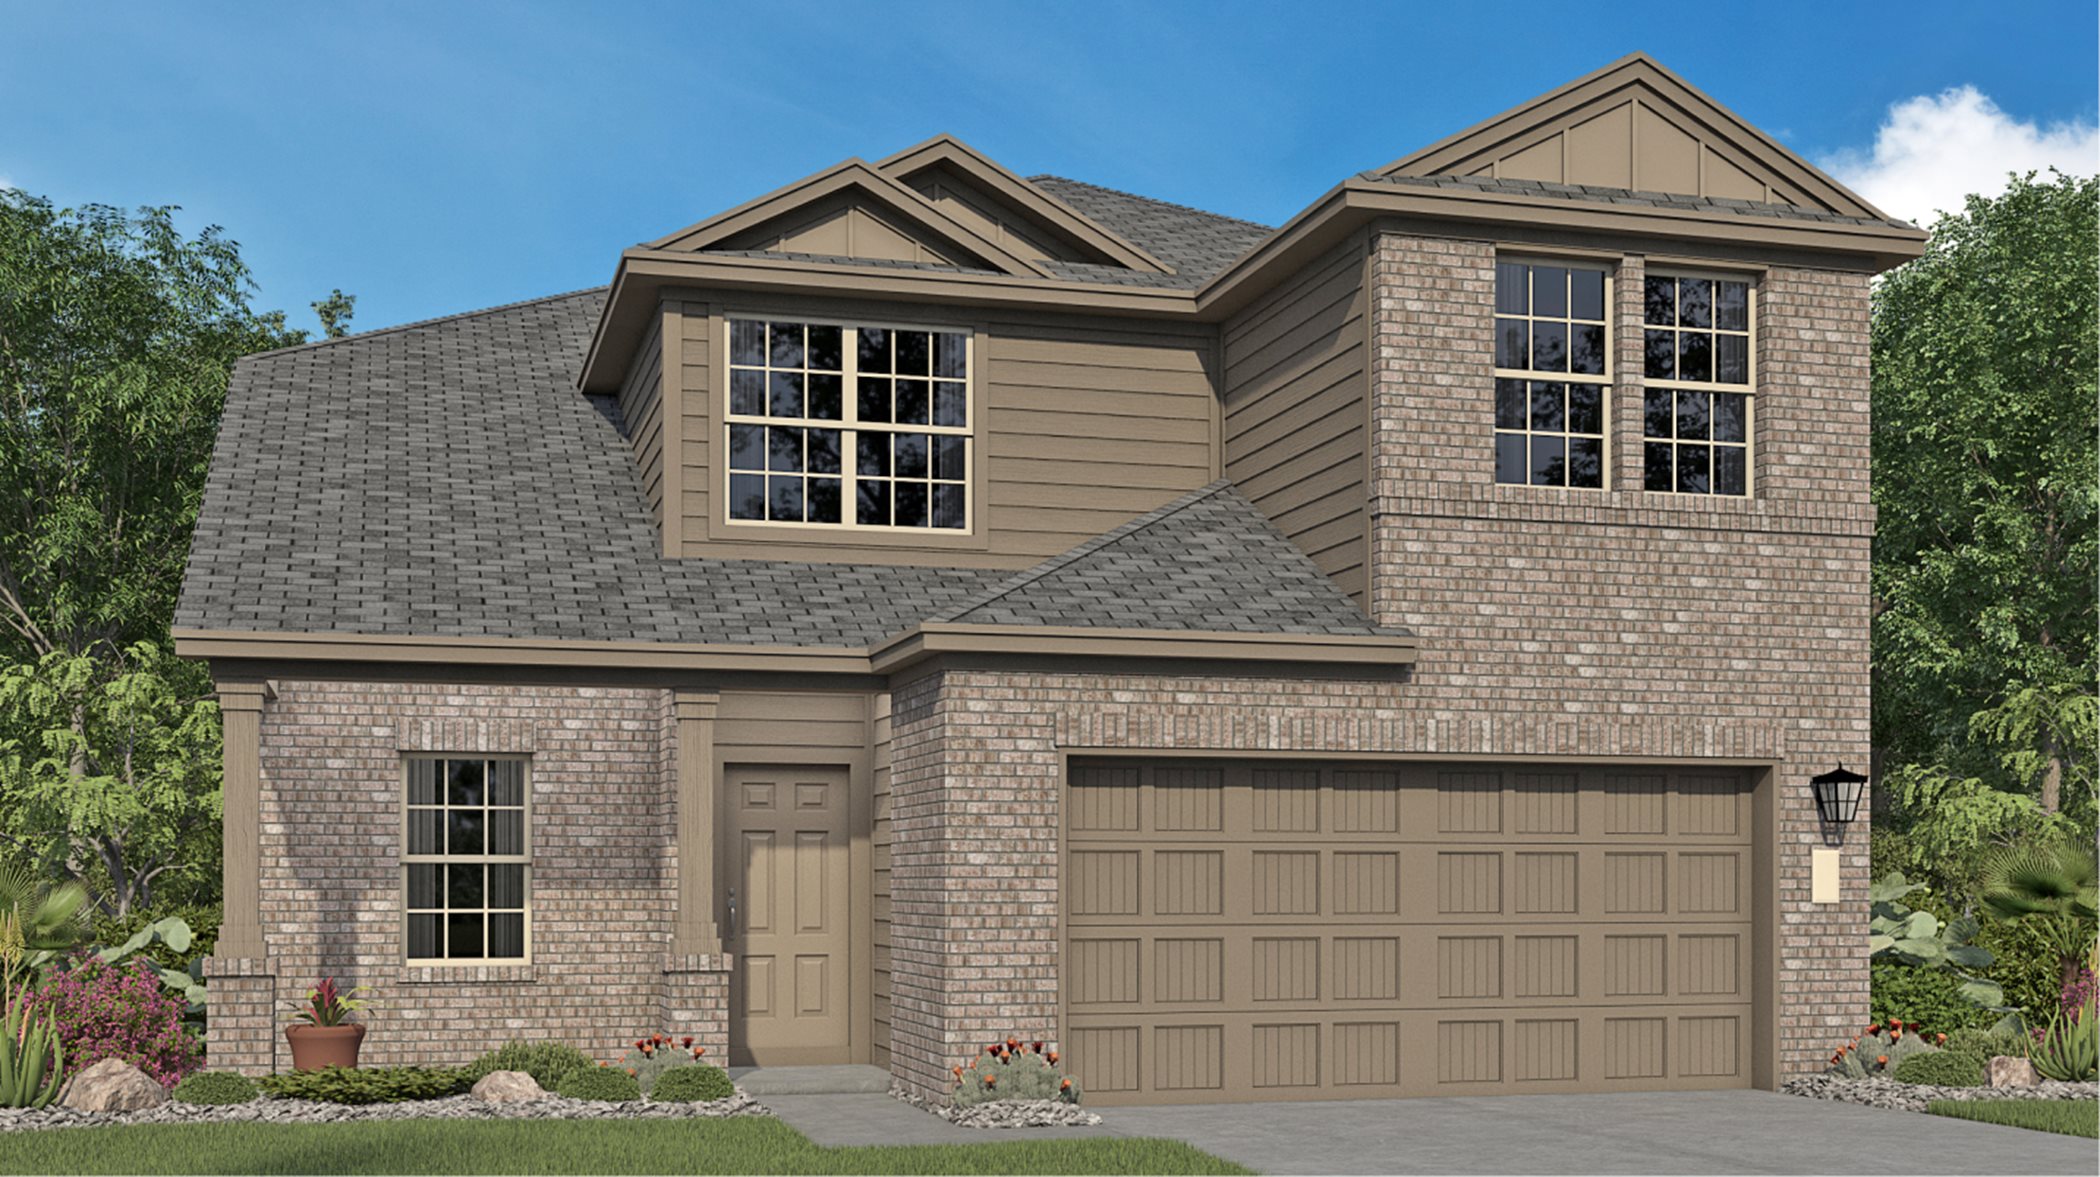 Bexley New Home Plan in Barrington Collection at Silos